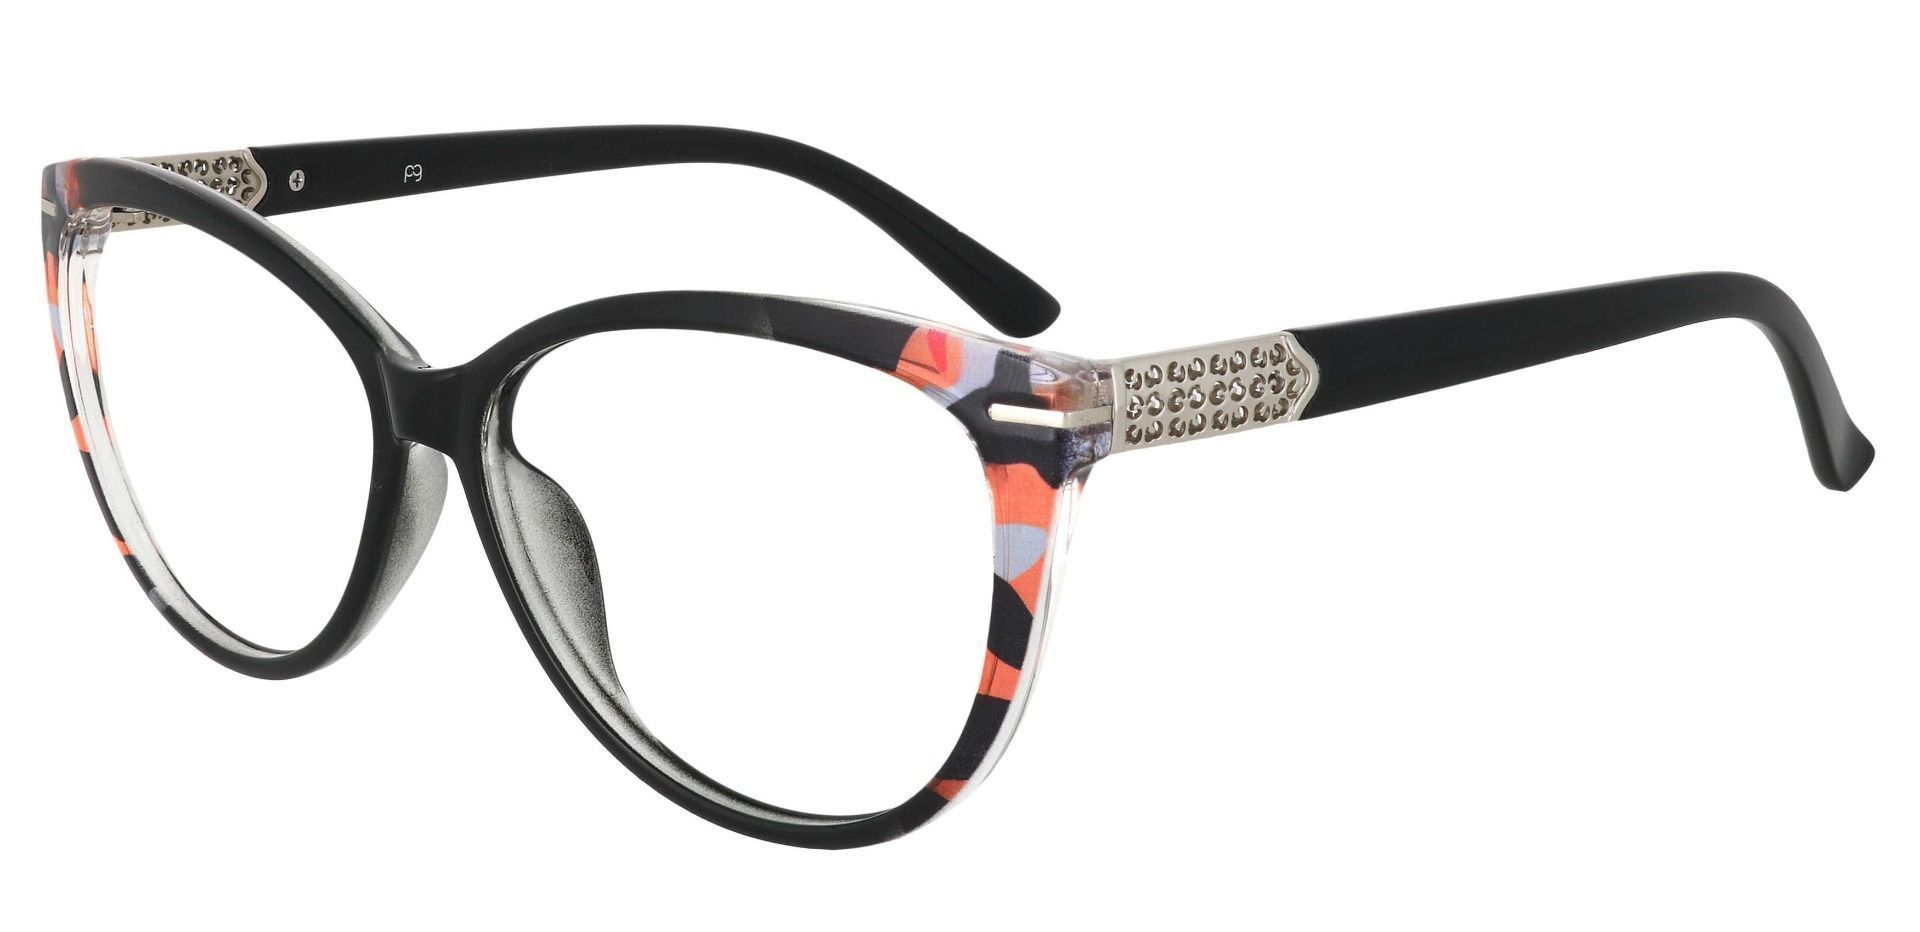 Maggie Cat Eye Prescription Glasses - Black With Peach Crystal Accents